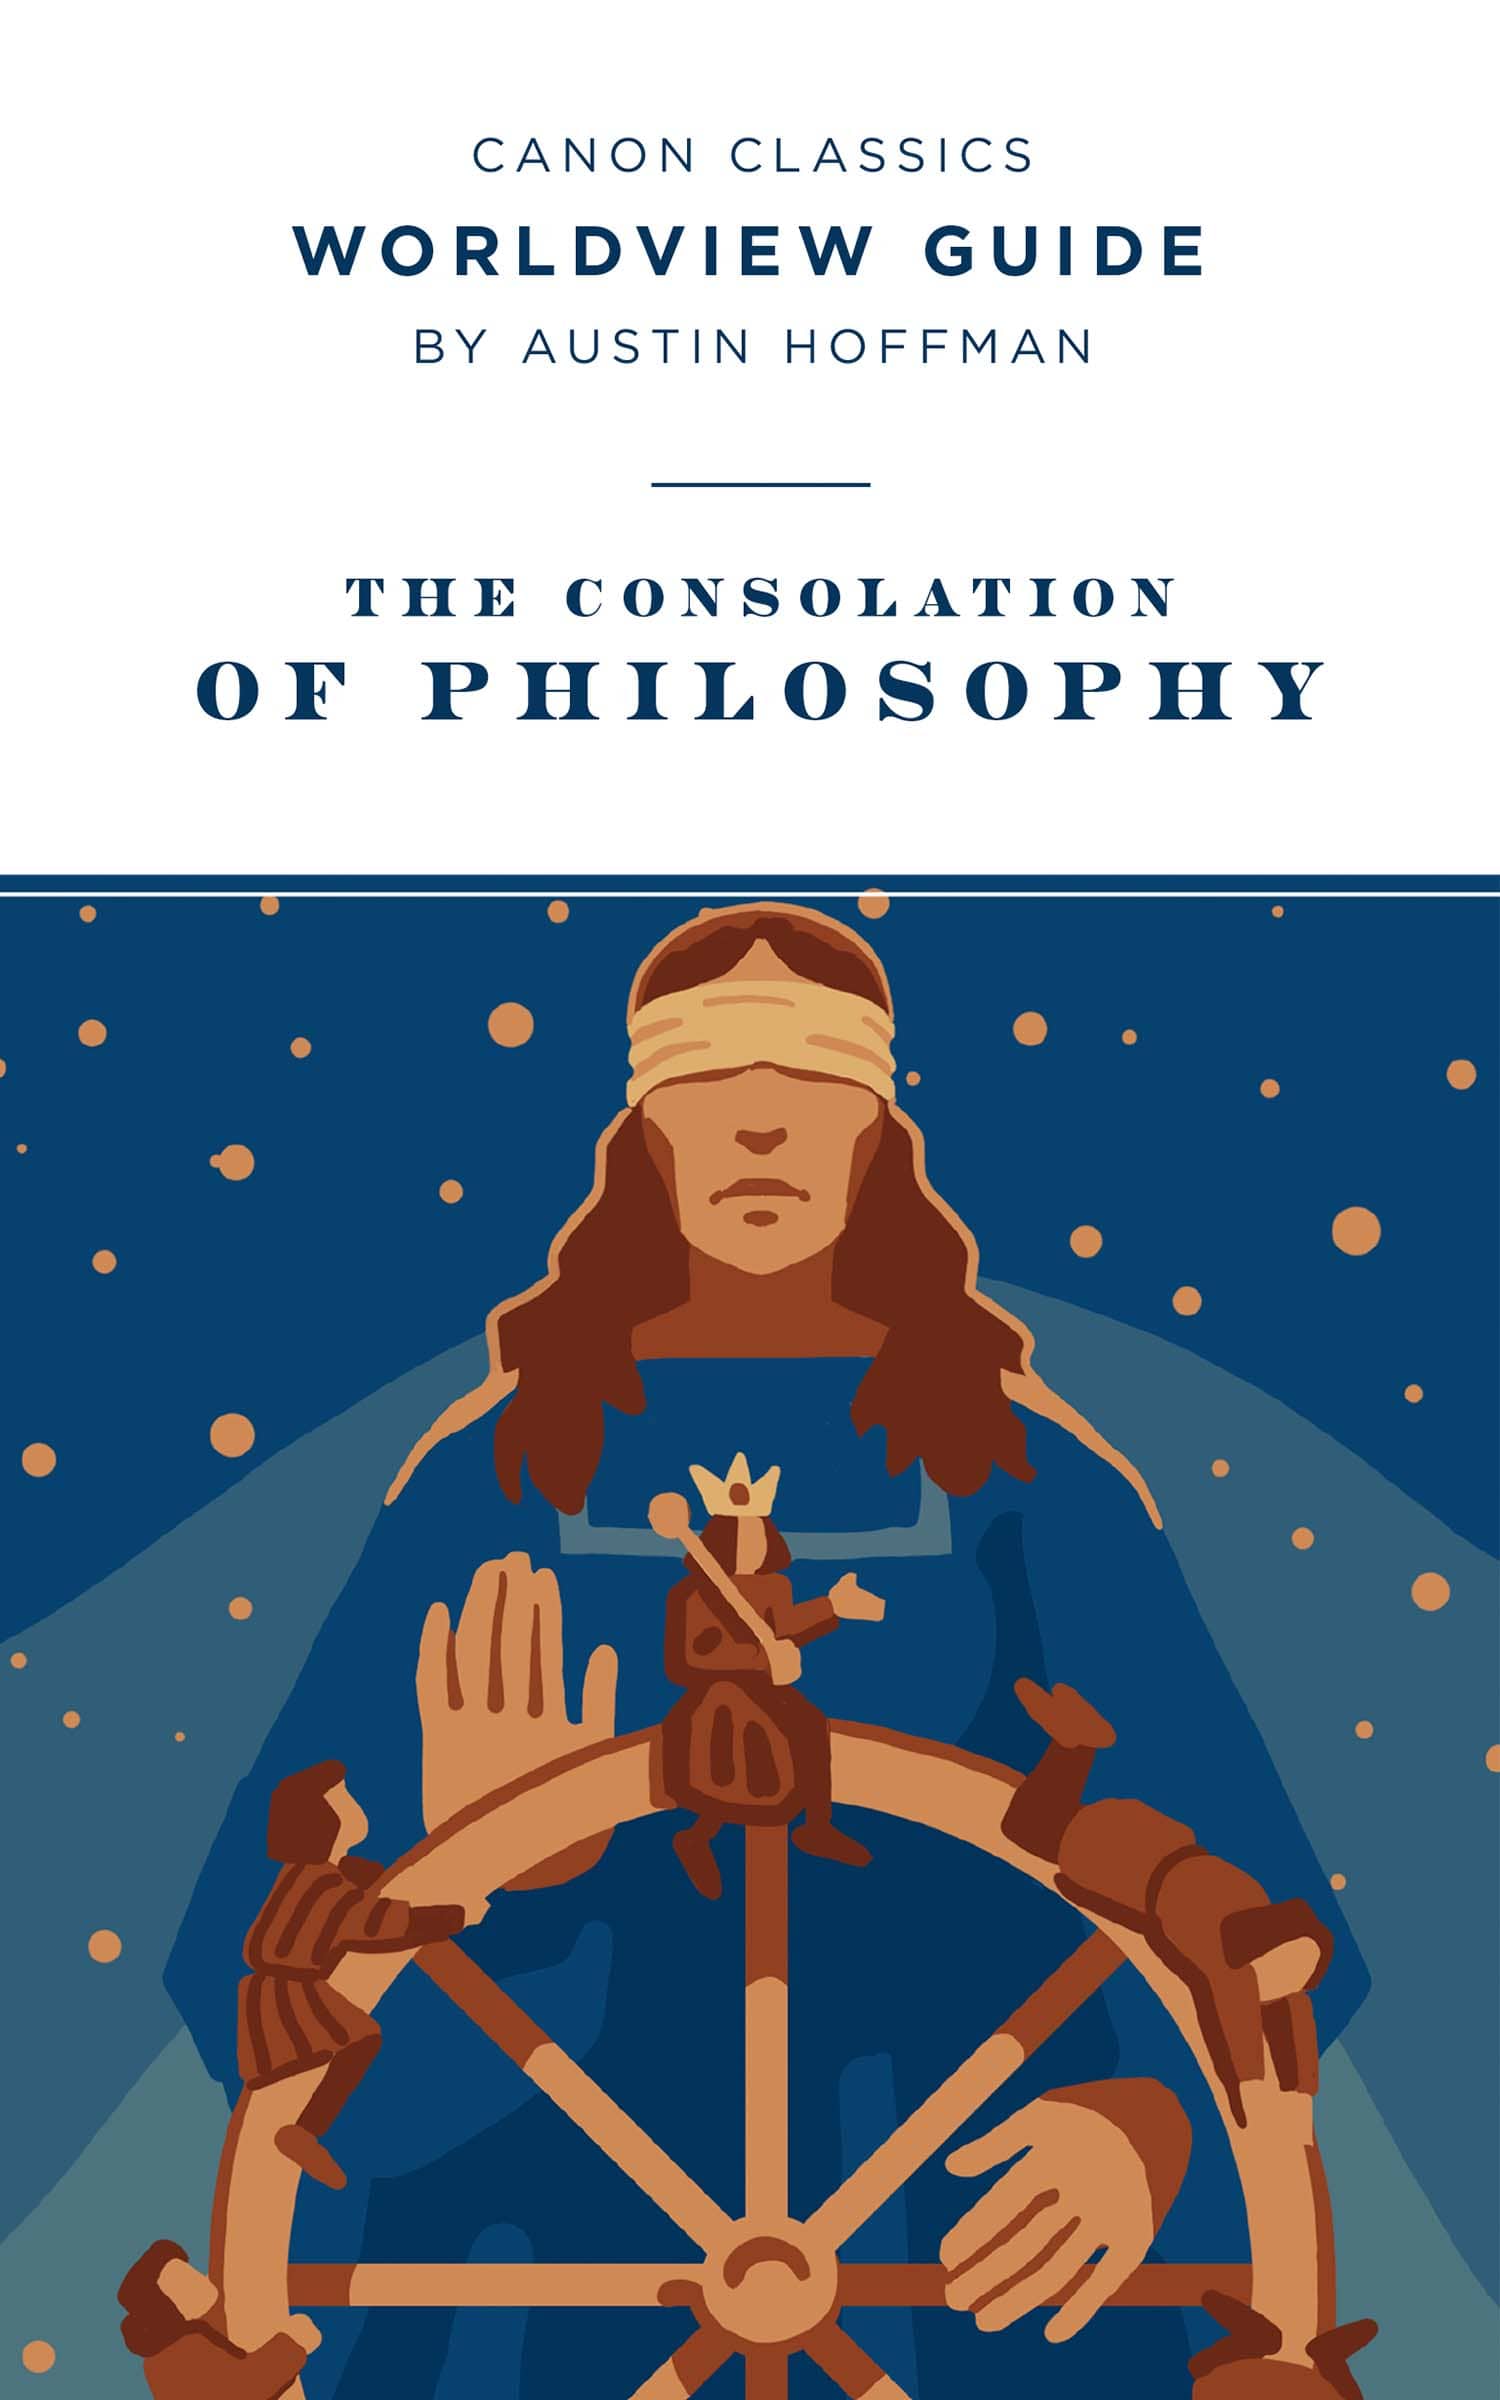 Worldview Guide for The Consolation of Philosophy